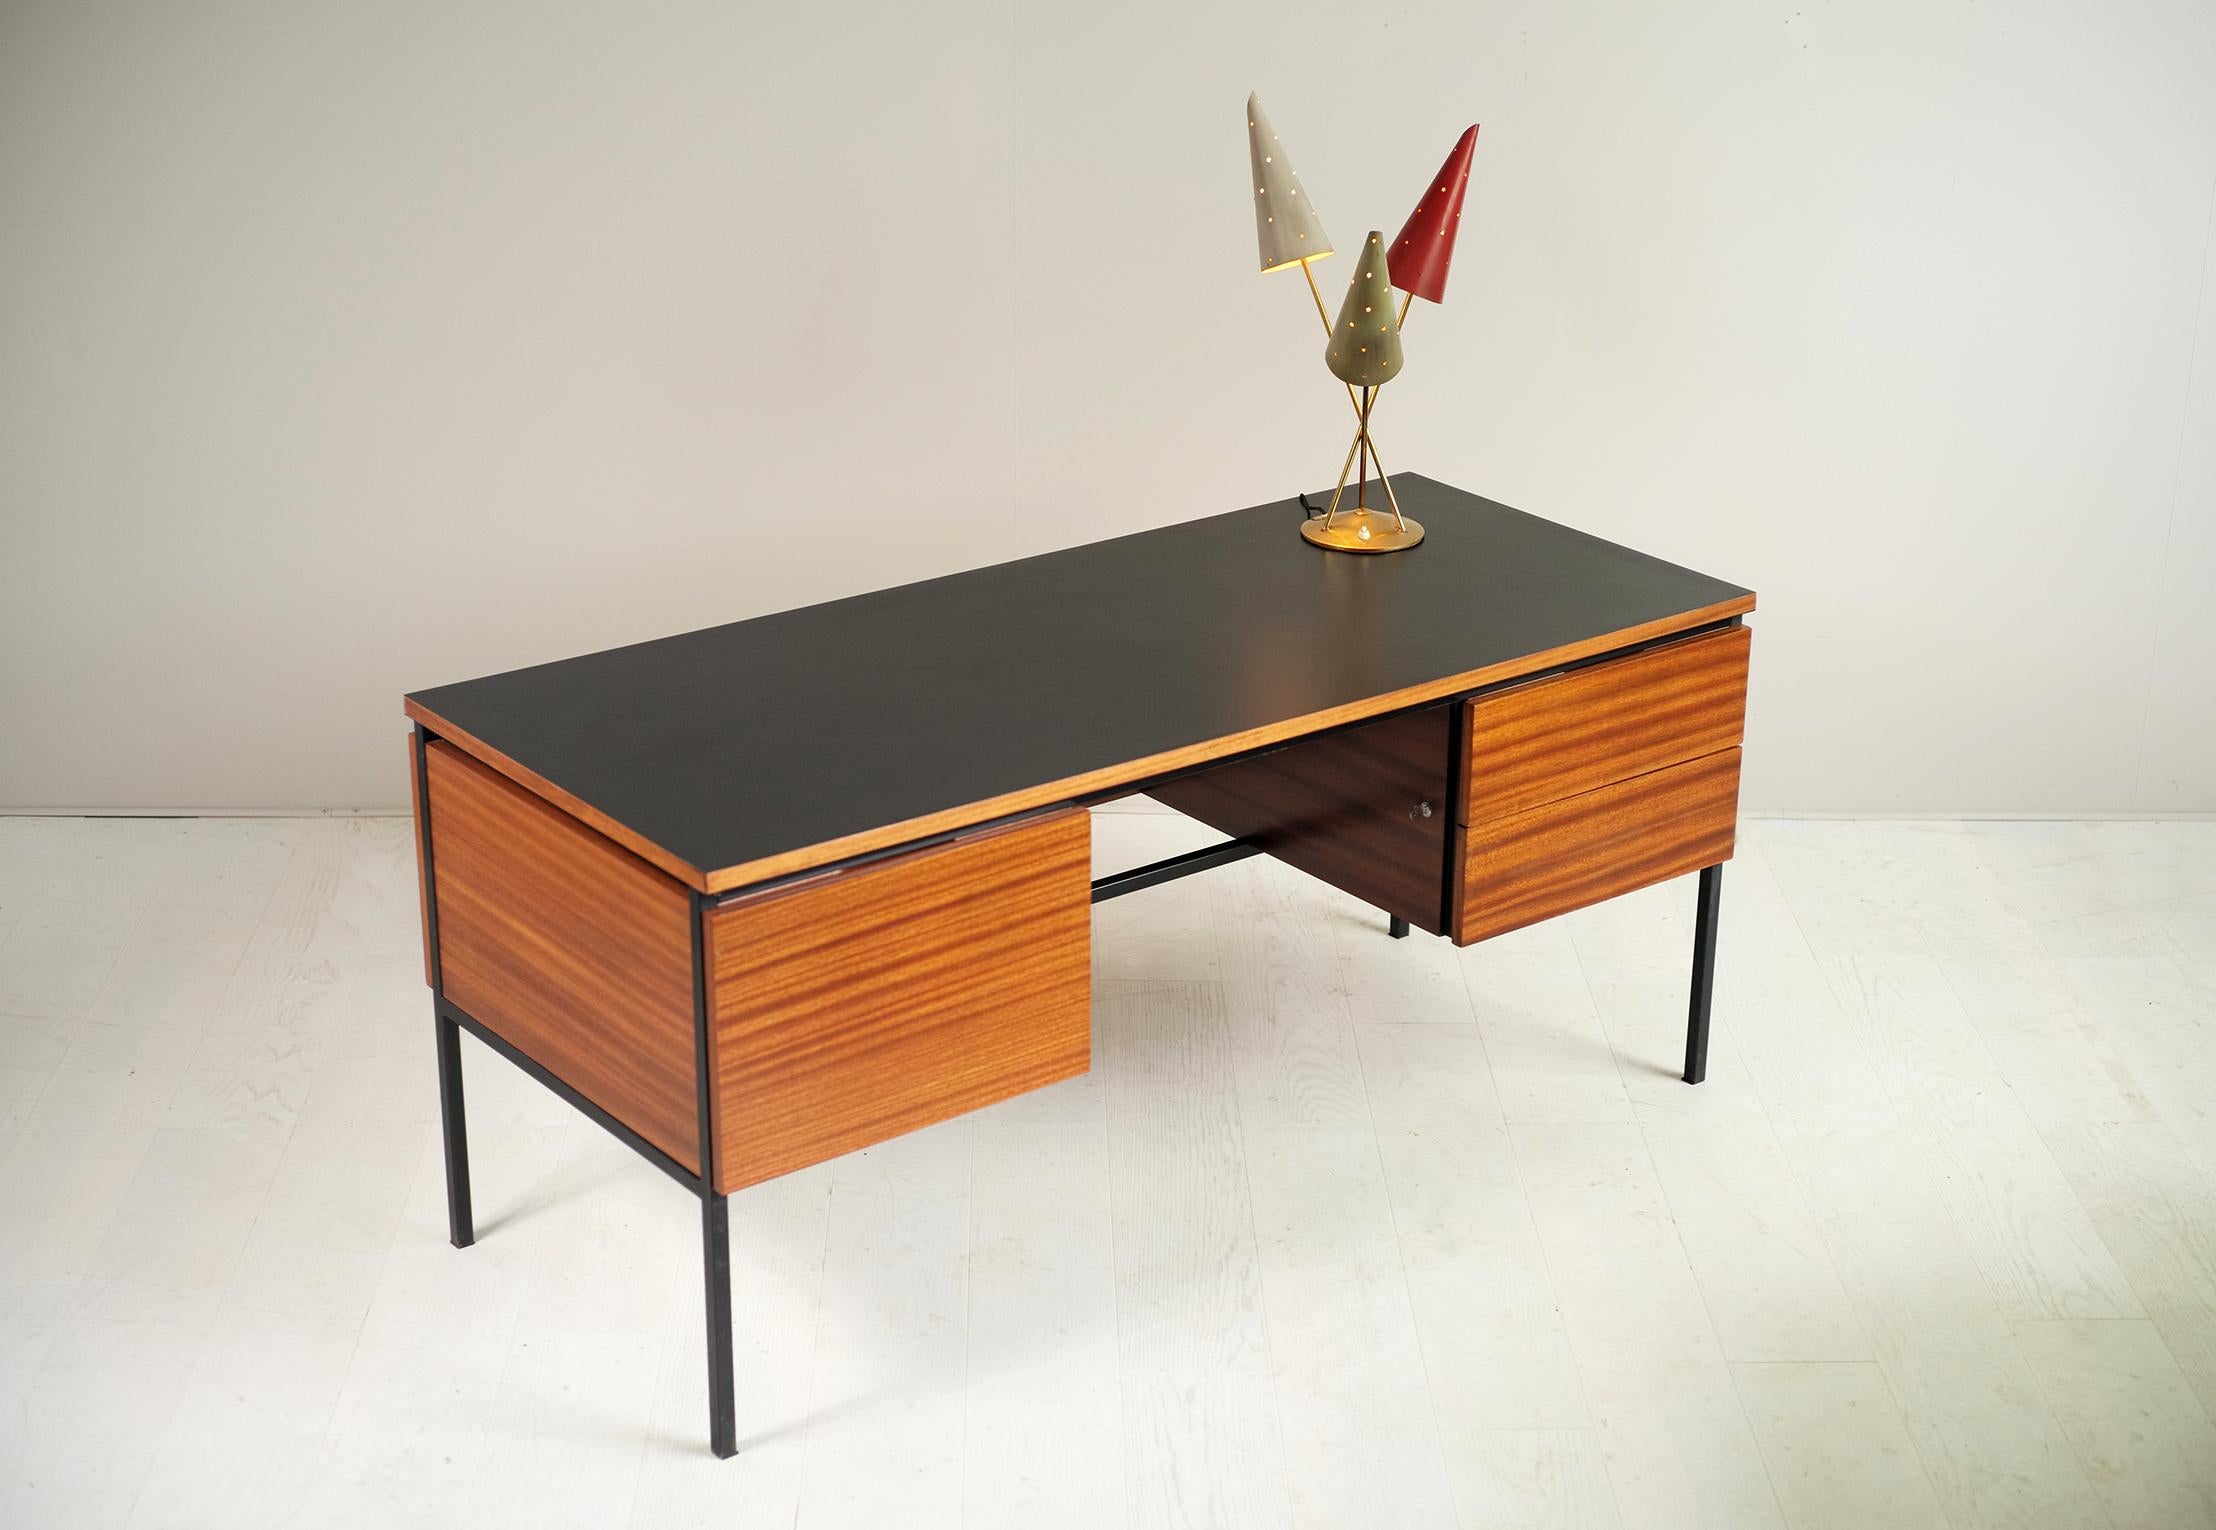 Executive desk n ° 620 in mahogany and black matte formica by Pierre Guariche for the Minvielle Editions, France 1960. Black lacquered quadrangular base, a drawer box for left hanging filing cabinets, a box with two drawers on the right, both